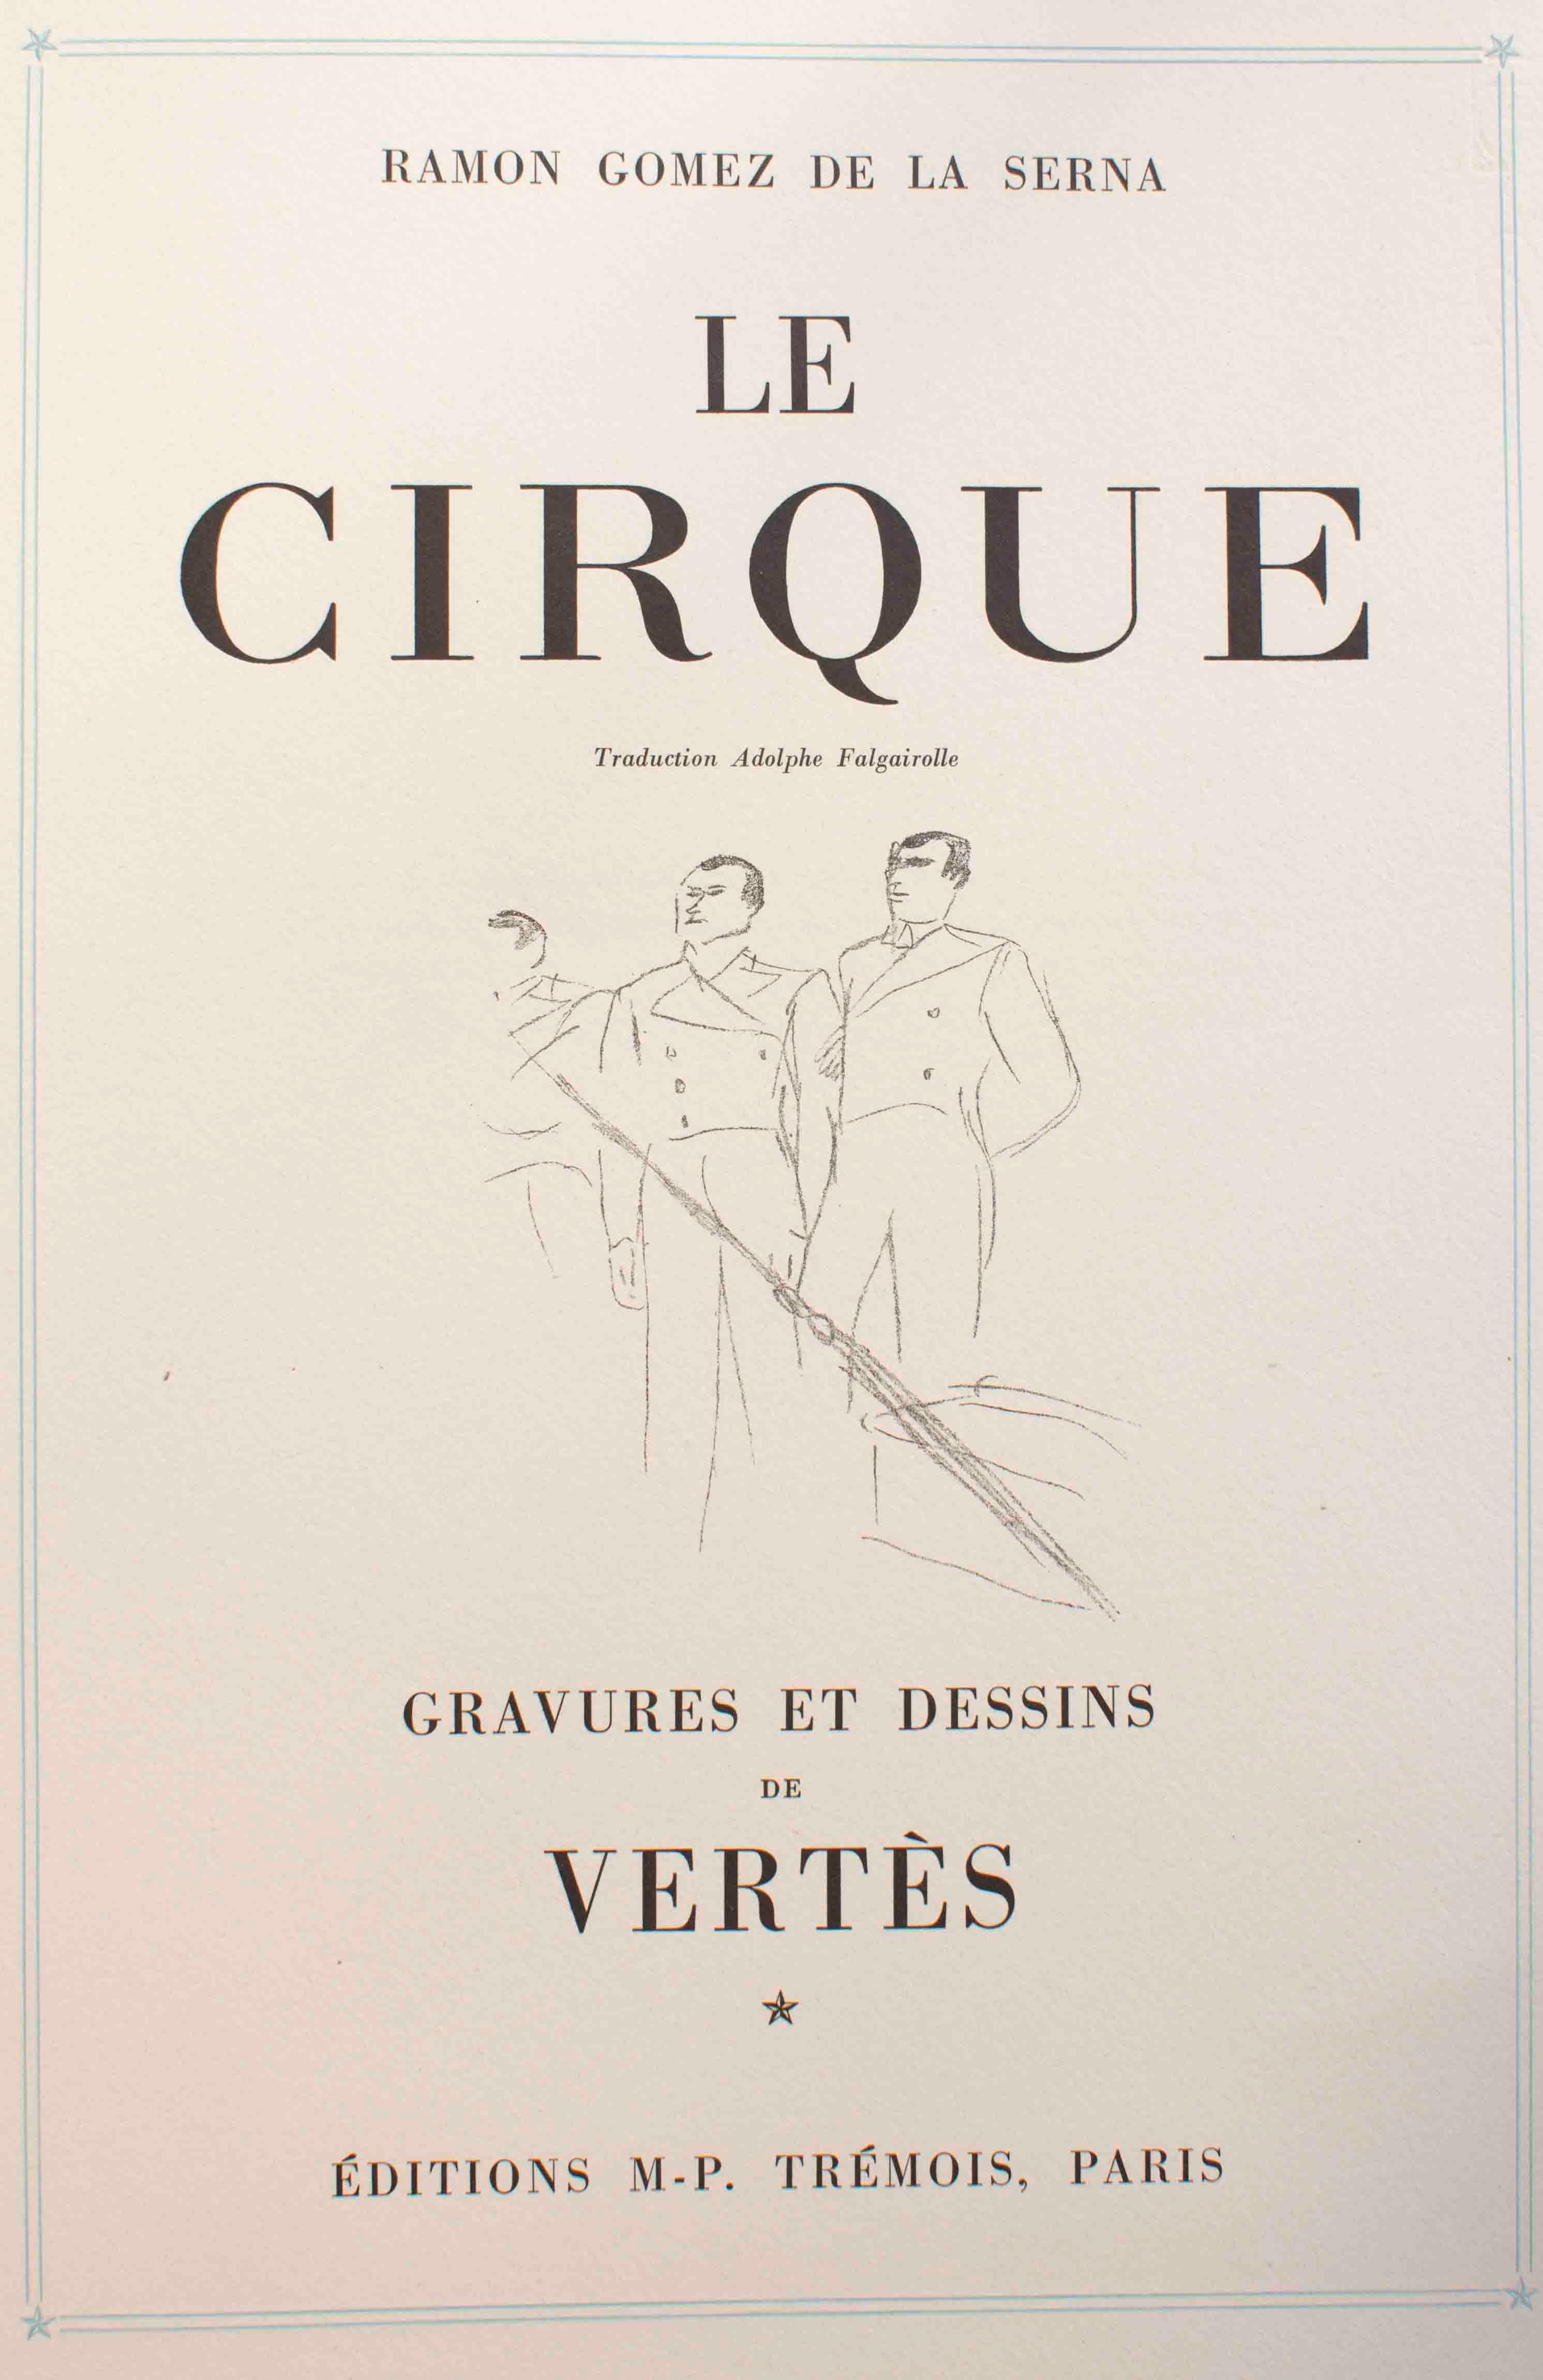 Le Cirque by Vertes and De la Serna is an edition of 103 copies including 5 original colour etchings and many drawings reproduced with lithograph techniques by Vertès. Includes soft cover on blue paper with titles in gilt and hard cover on